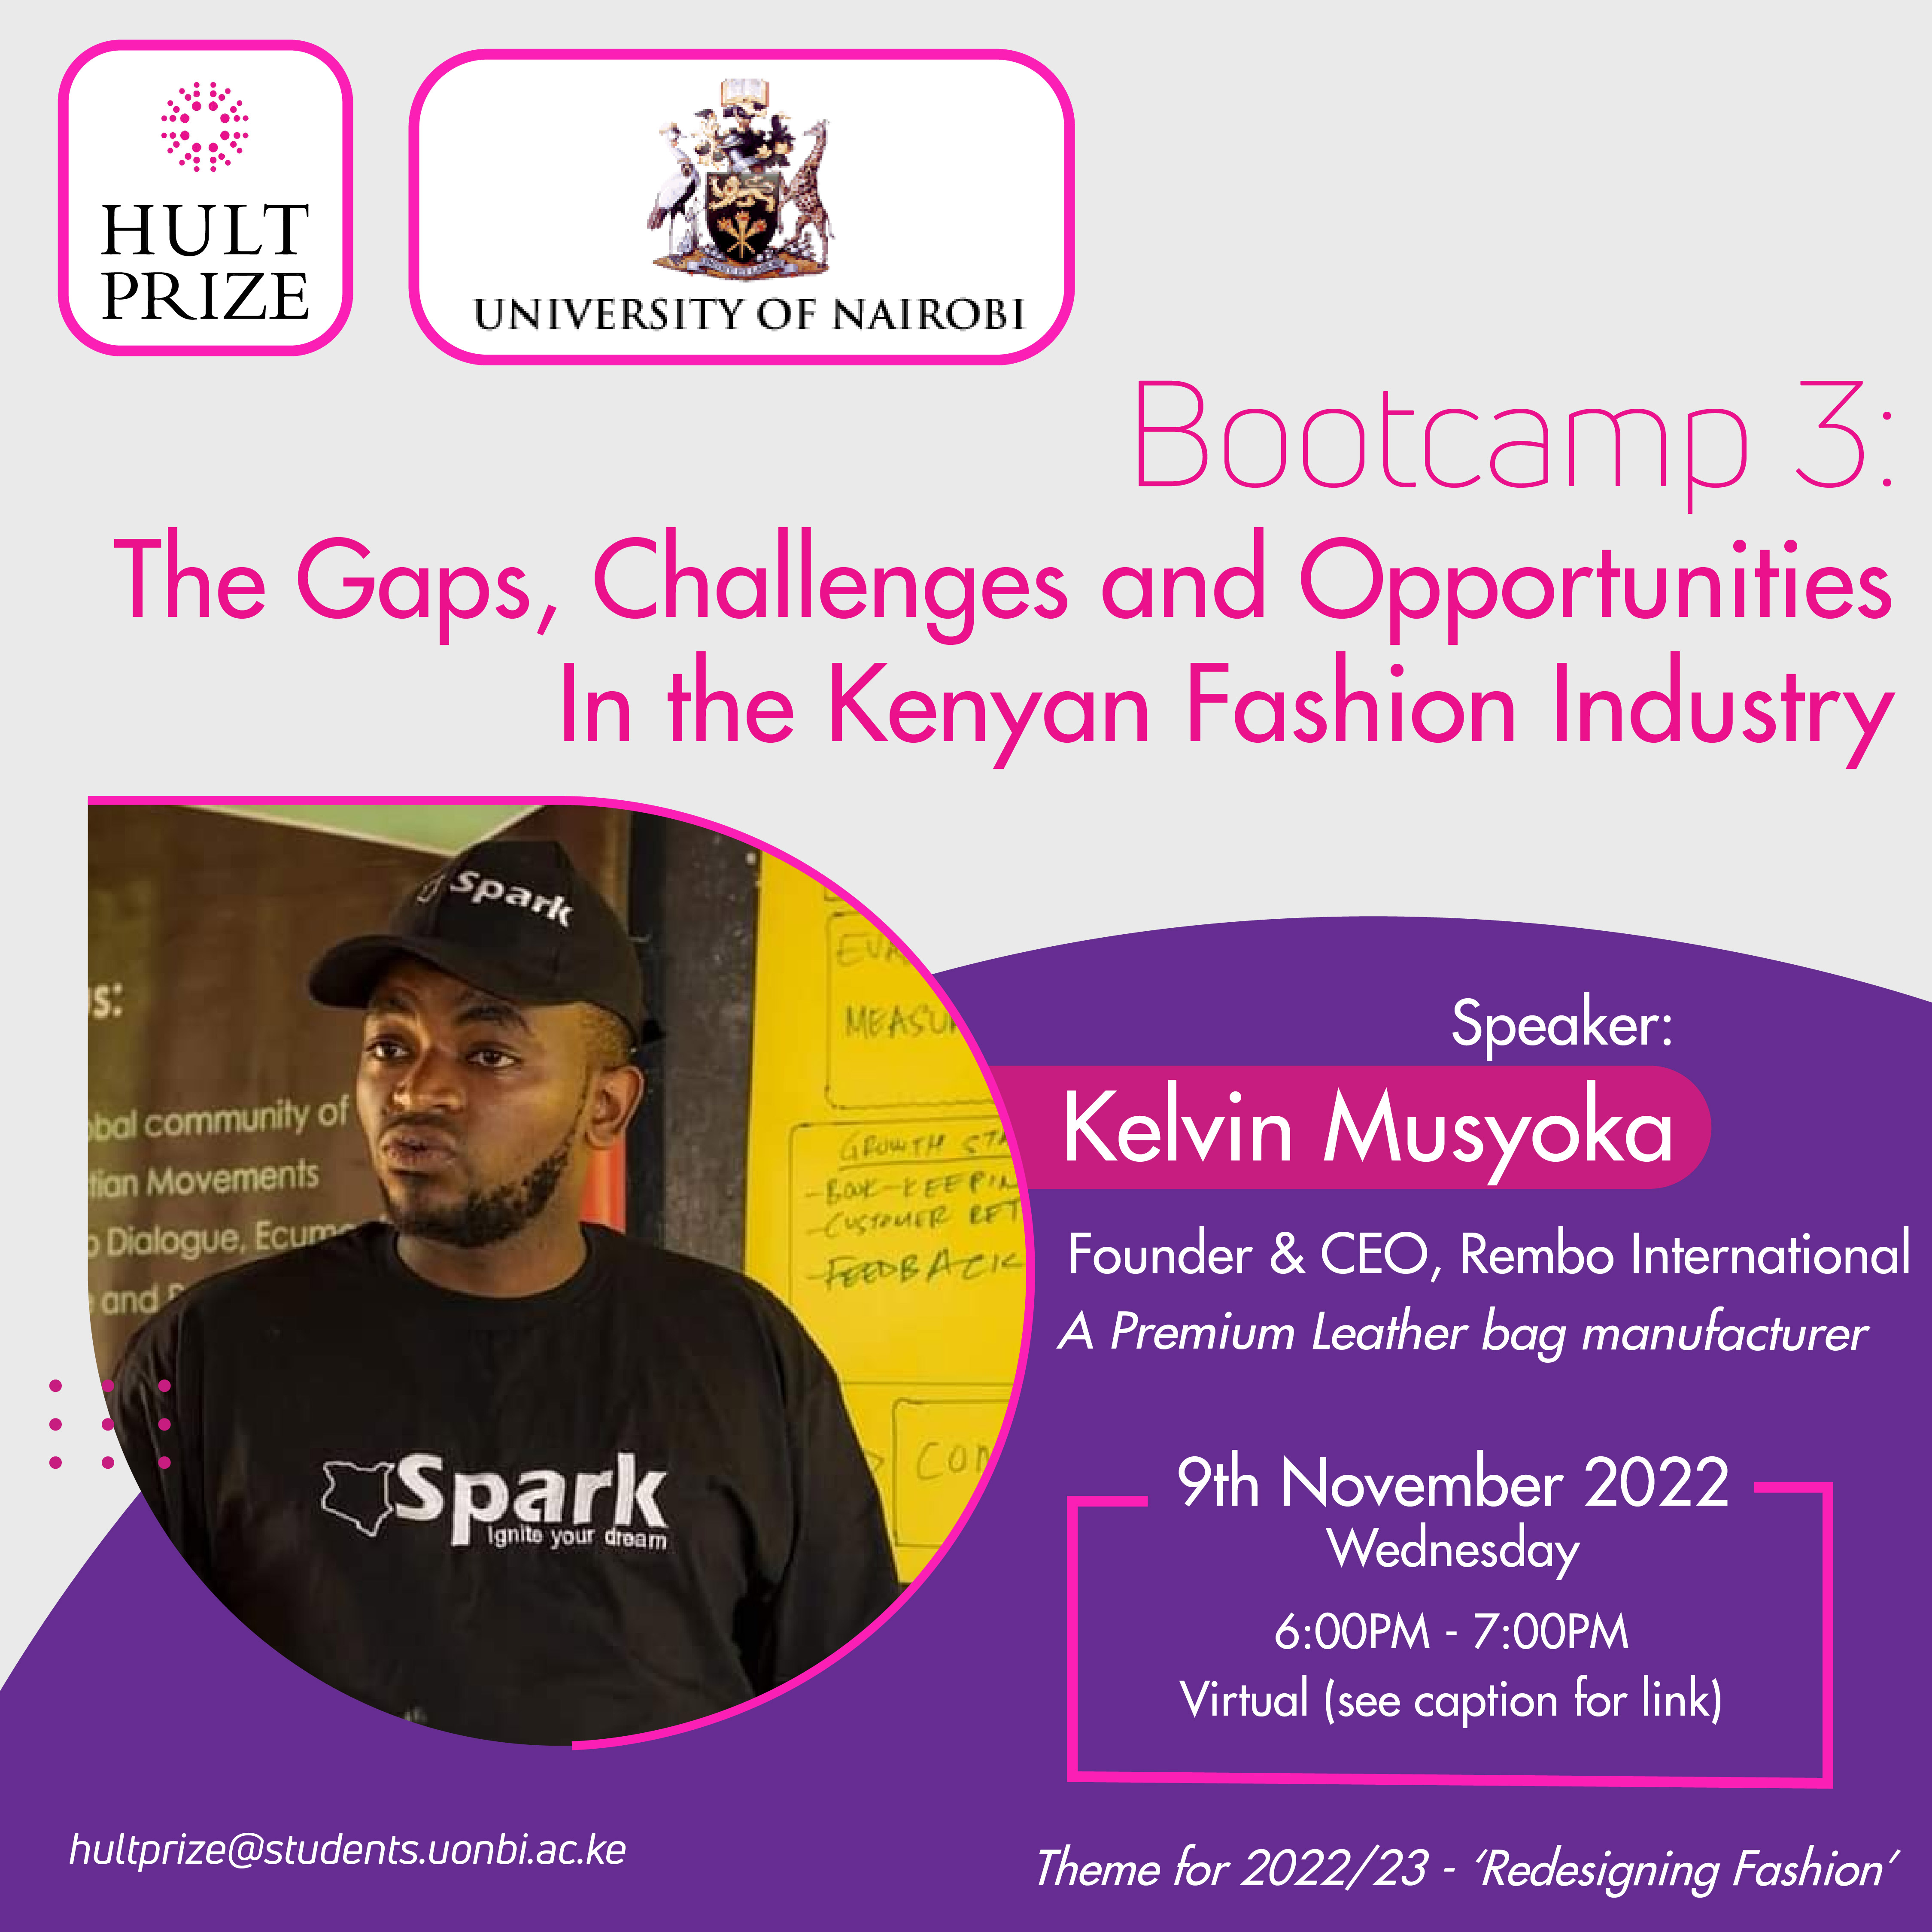 HULT PRIZE BOOTCAMP 3 ‘THE GAPS-CHALLENGES AND OPPORTUNITIES IN THE KENYAN FASHION INDUSTRY